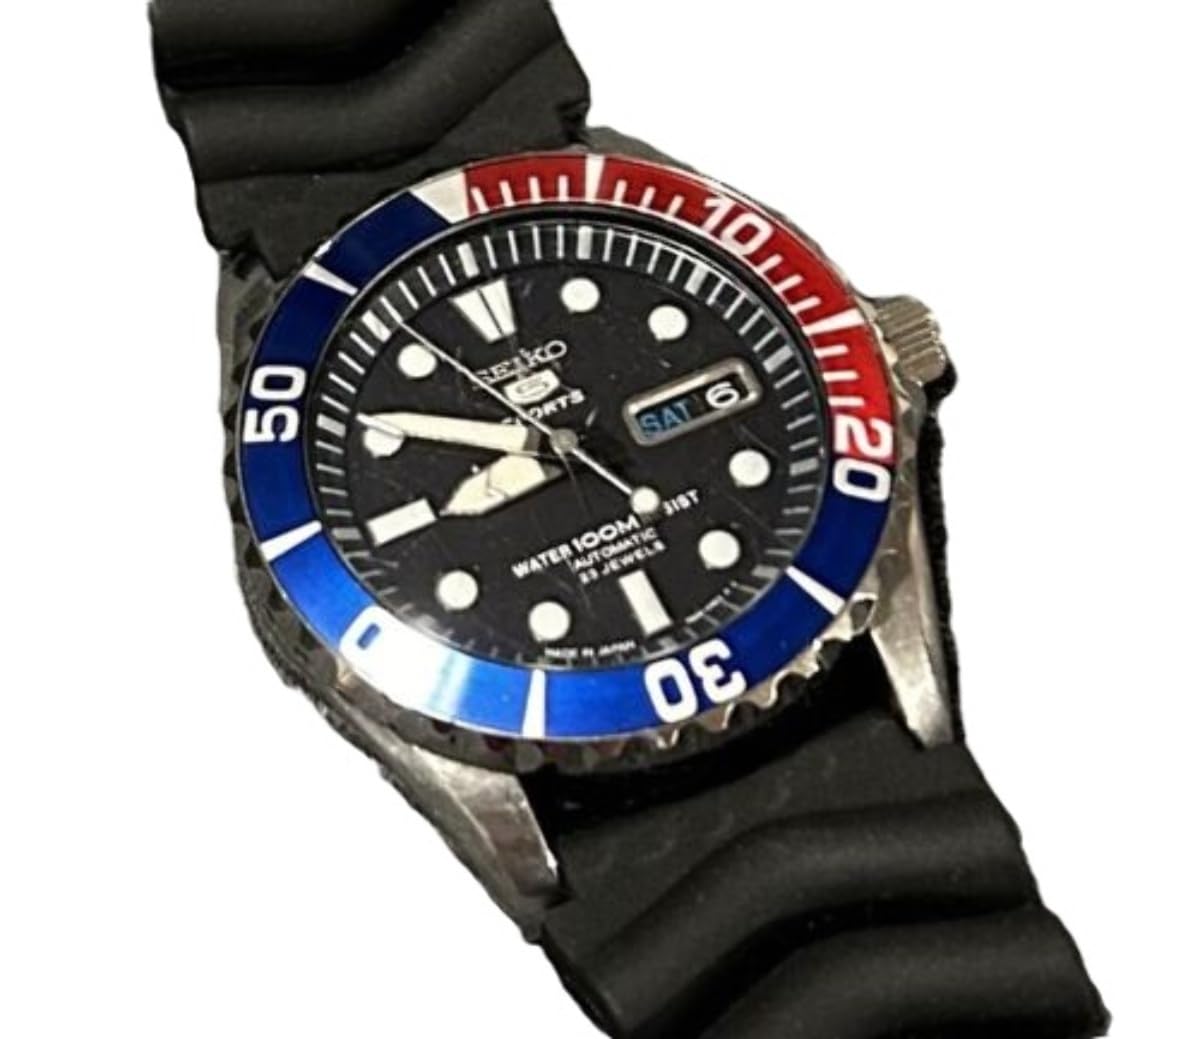 BEZEL INSERT COMPATIBLE WITH SEIKO 5 SEA URCHIN SNZF15K1,SNZF17 WATCH AUTO DIVER BLUE/RED